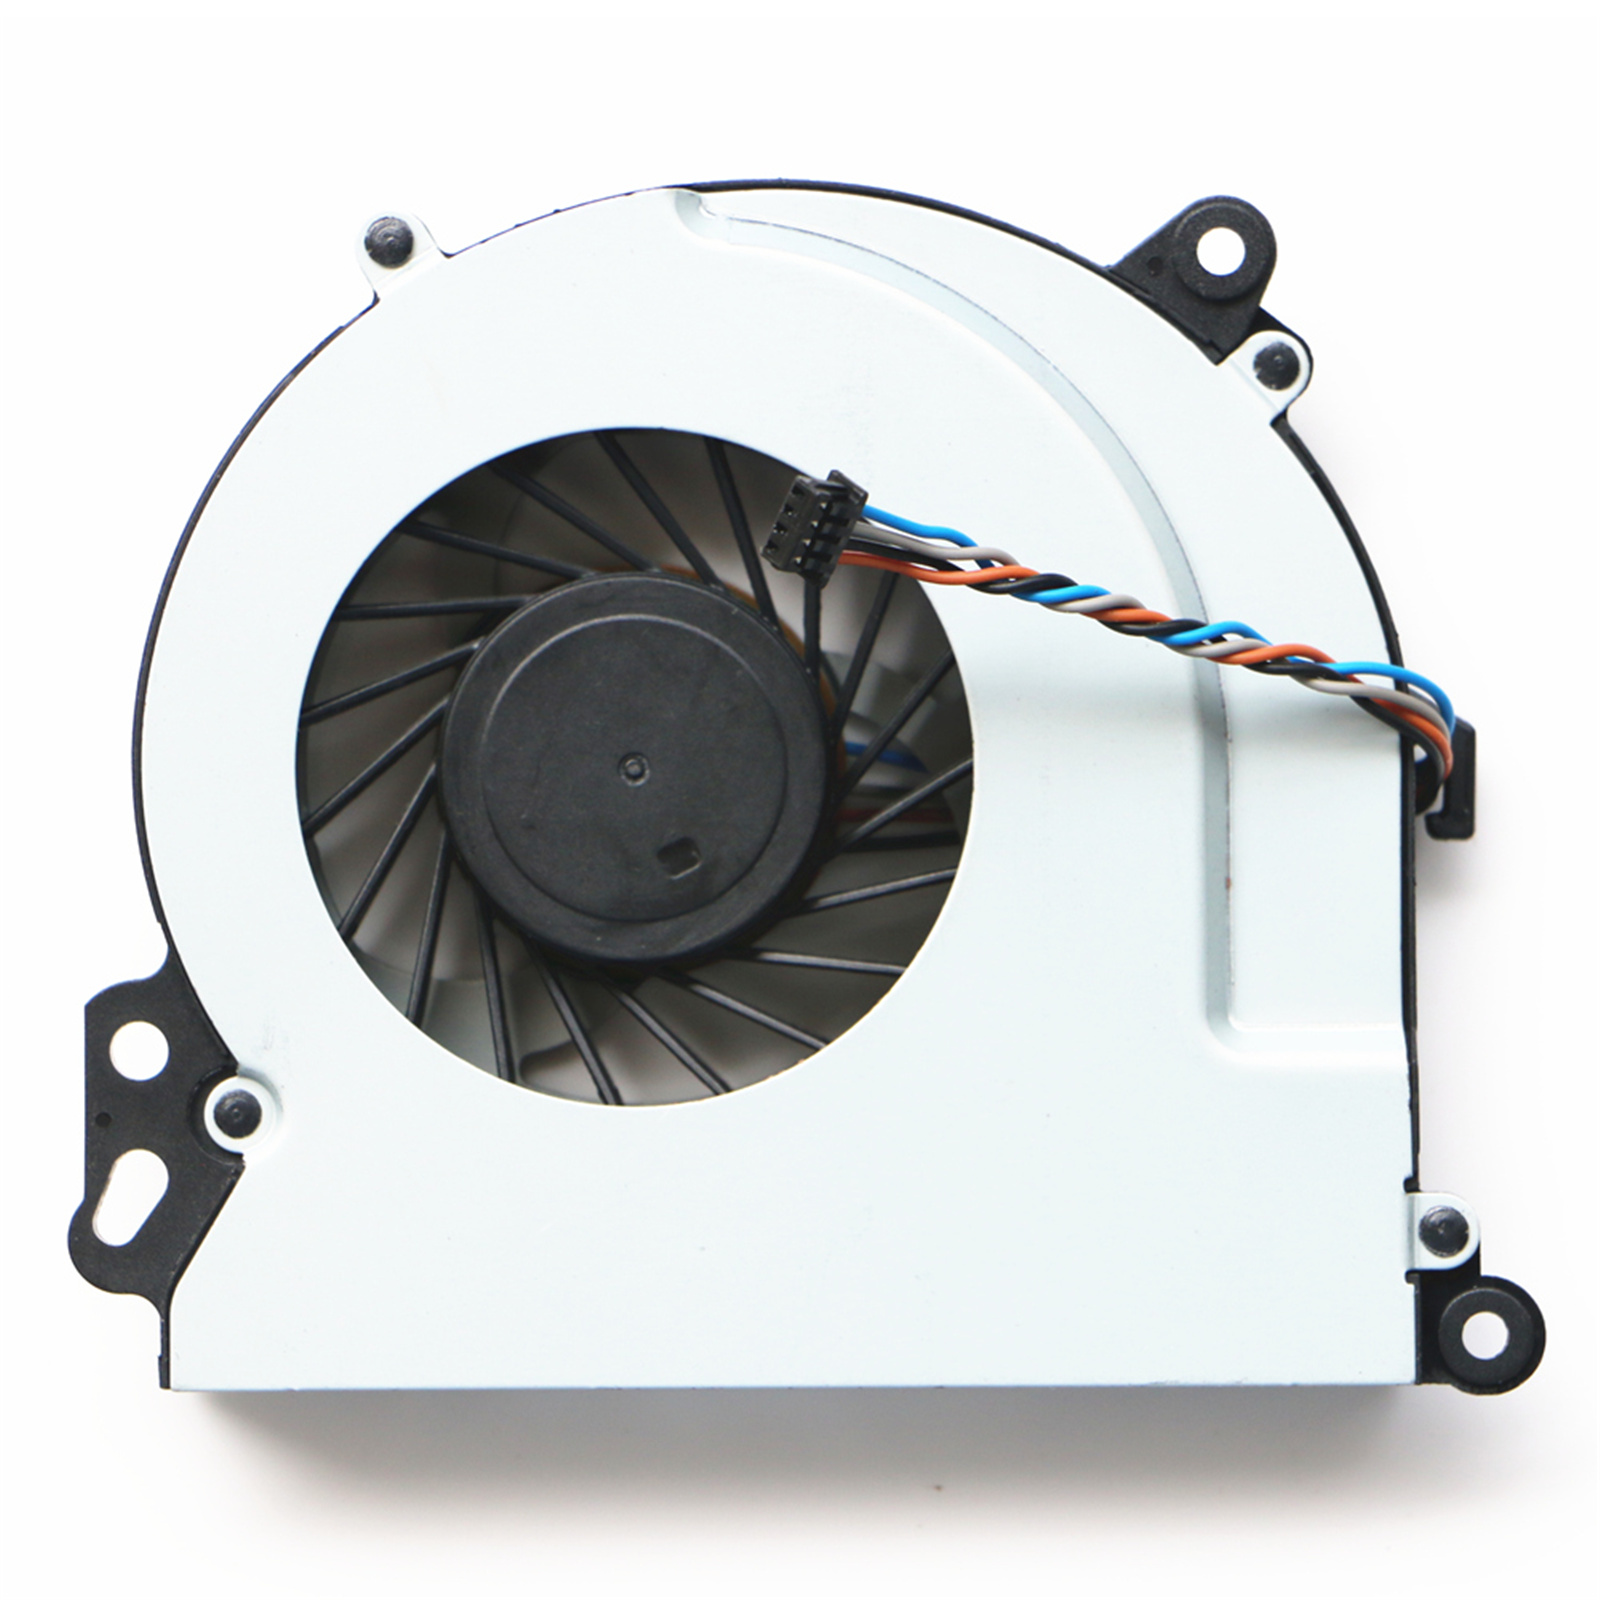 New For HP ENVY 17-j021nr Notebook PC Cpu Cooling Fan 